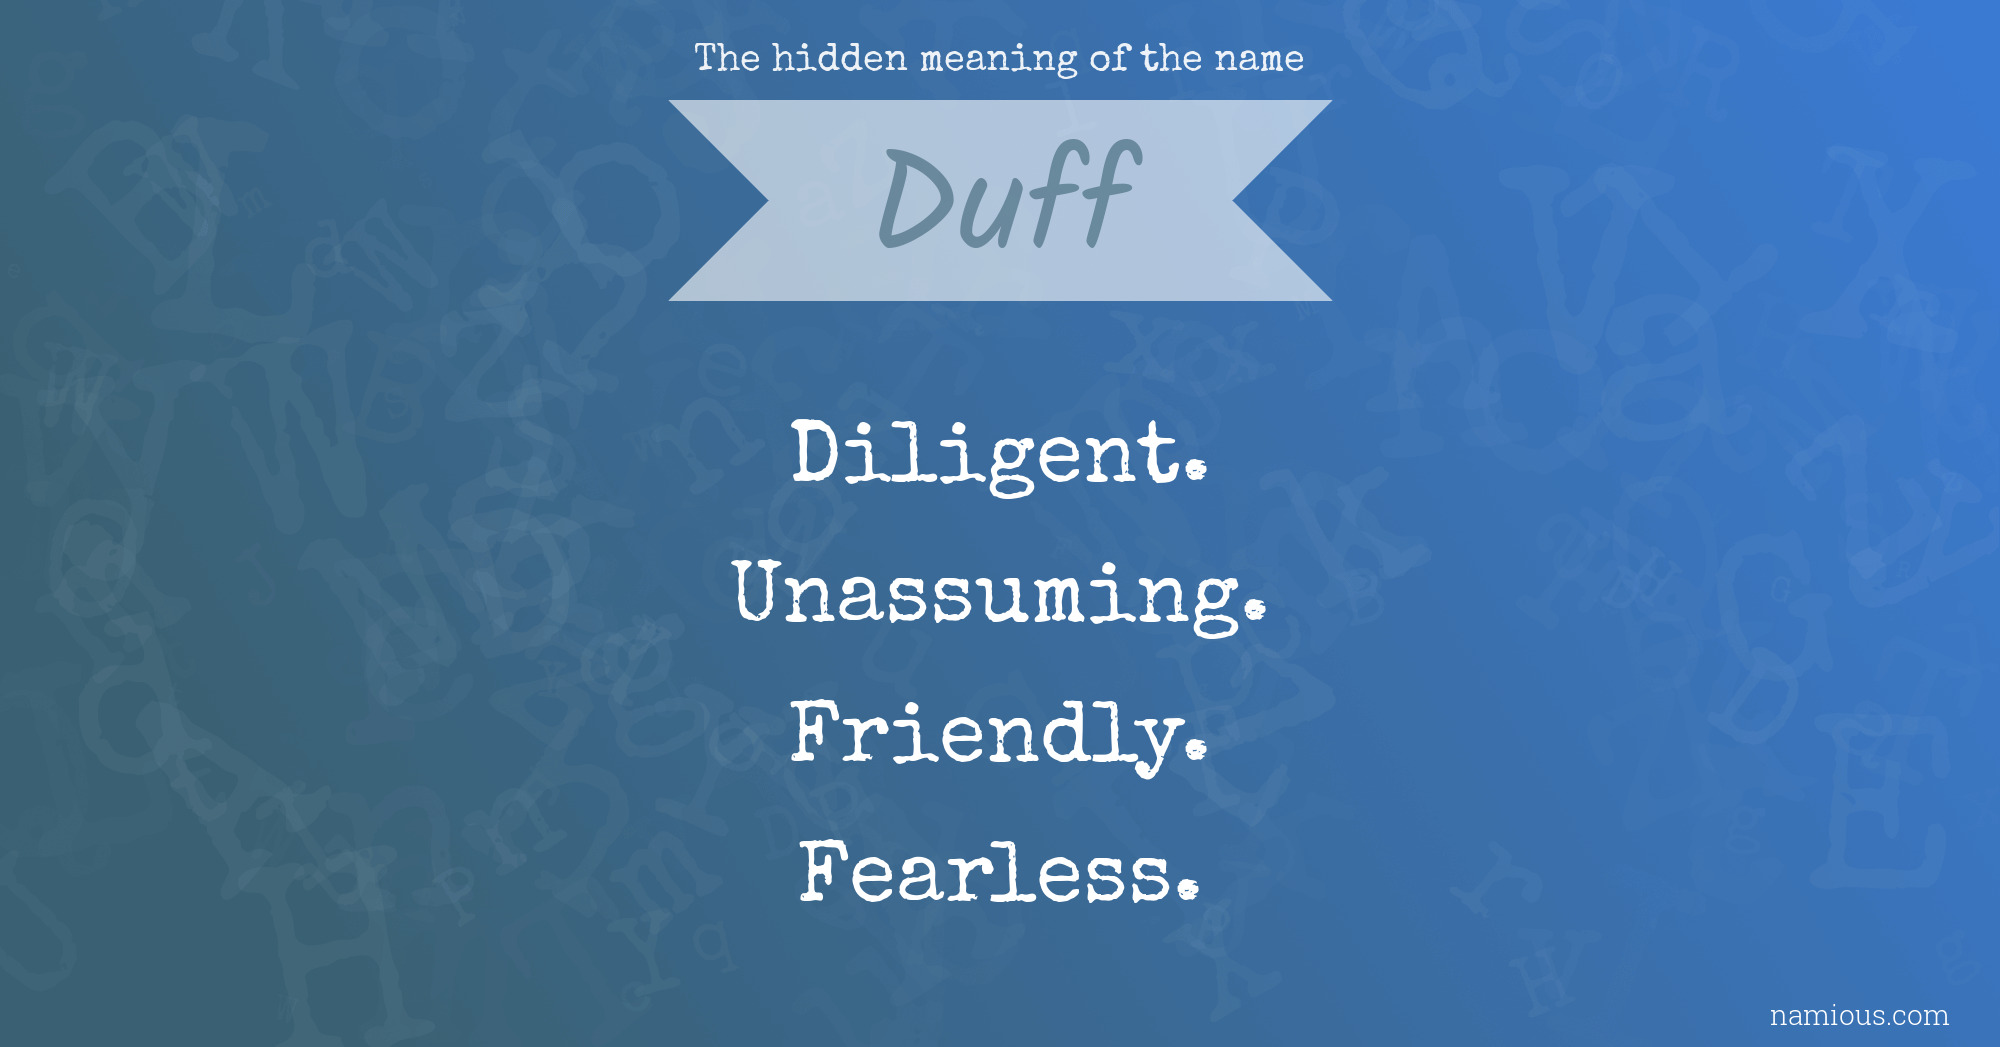 The hidden meaning of the name Duff